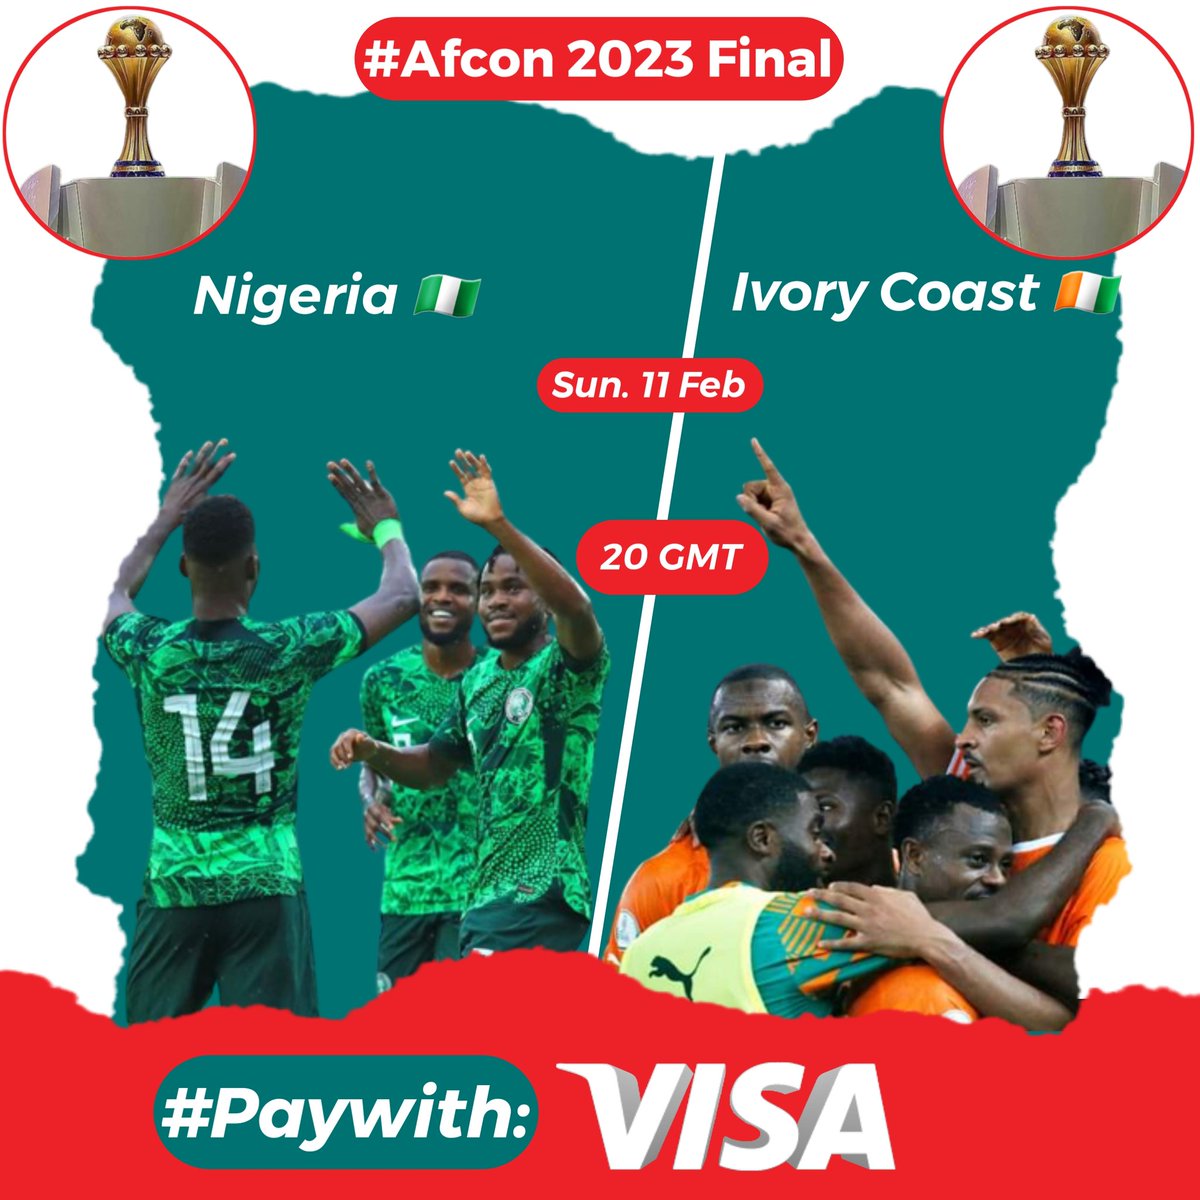 The #AFCON games are about to end. Visa has been an amazing sponsor. 
Nigeria vs Ivory Coast is setting the stage
Who do you believe will carry the cup home? 
While wait/enjoy remember to #Paywithvisa when you shop to enjoy zero transaction costs 👍💯🔥

#TotalEnergiesAFCON2023